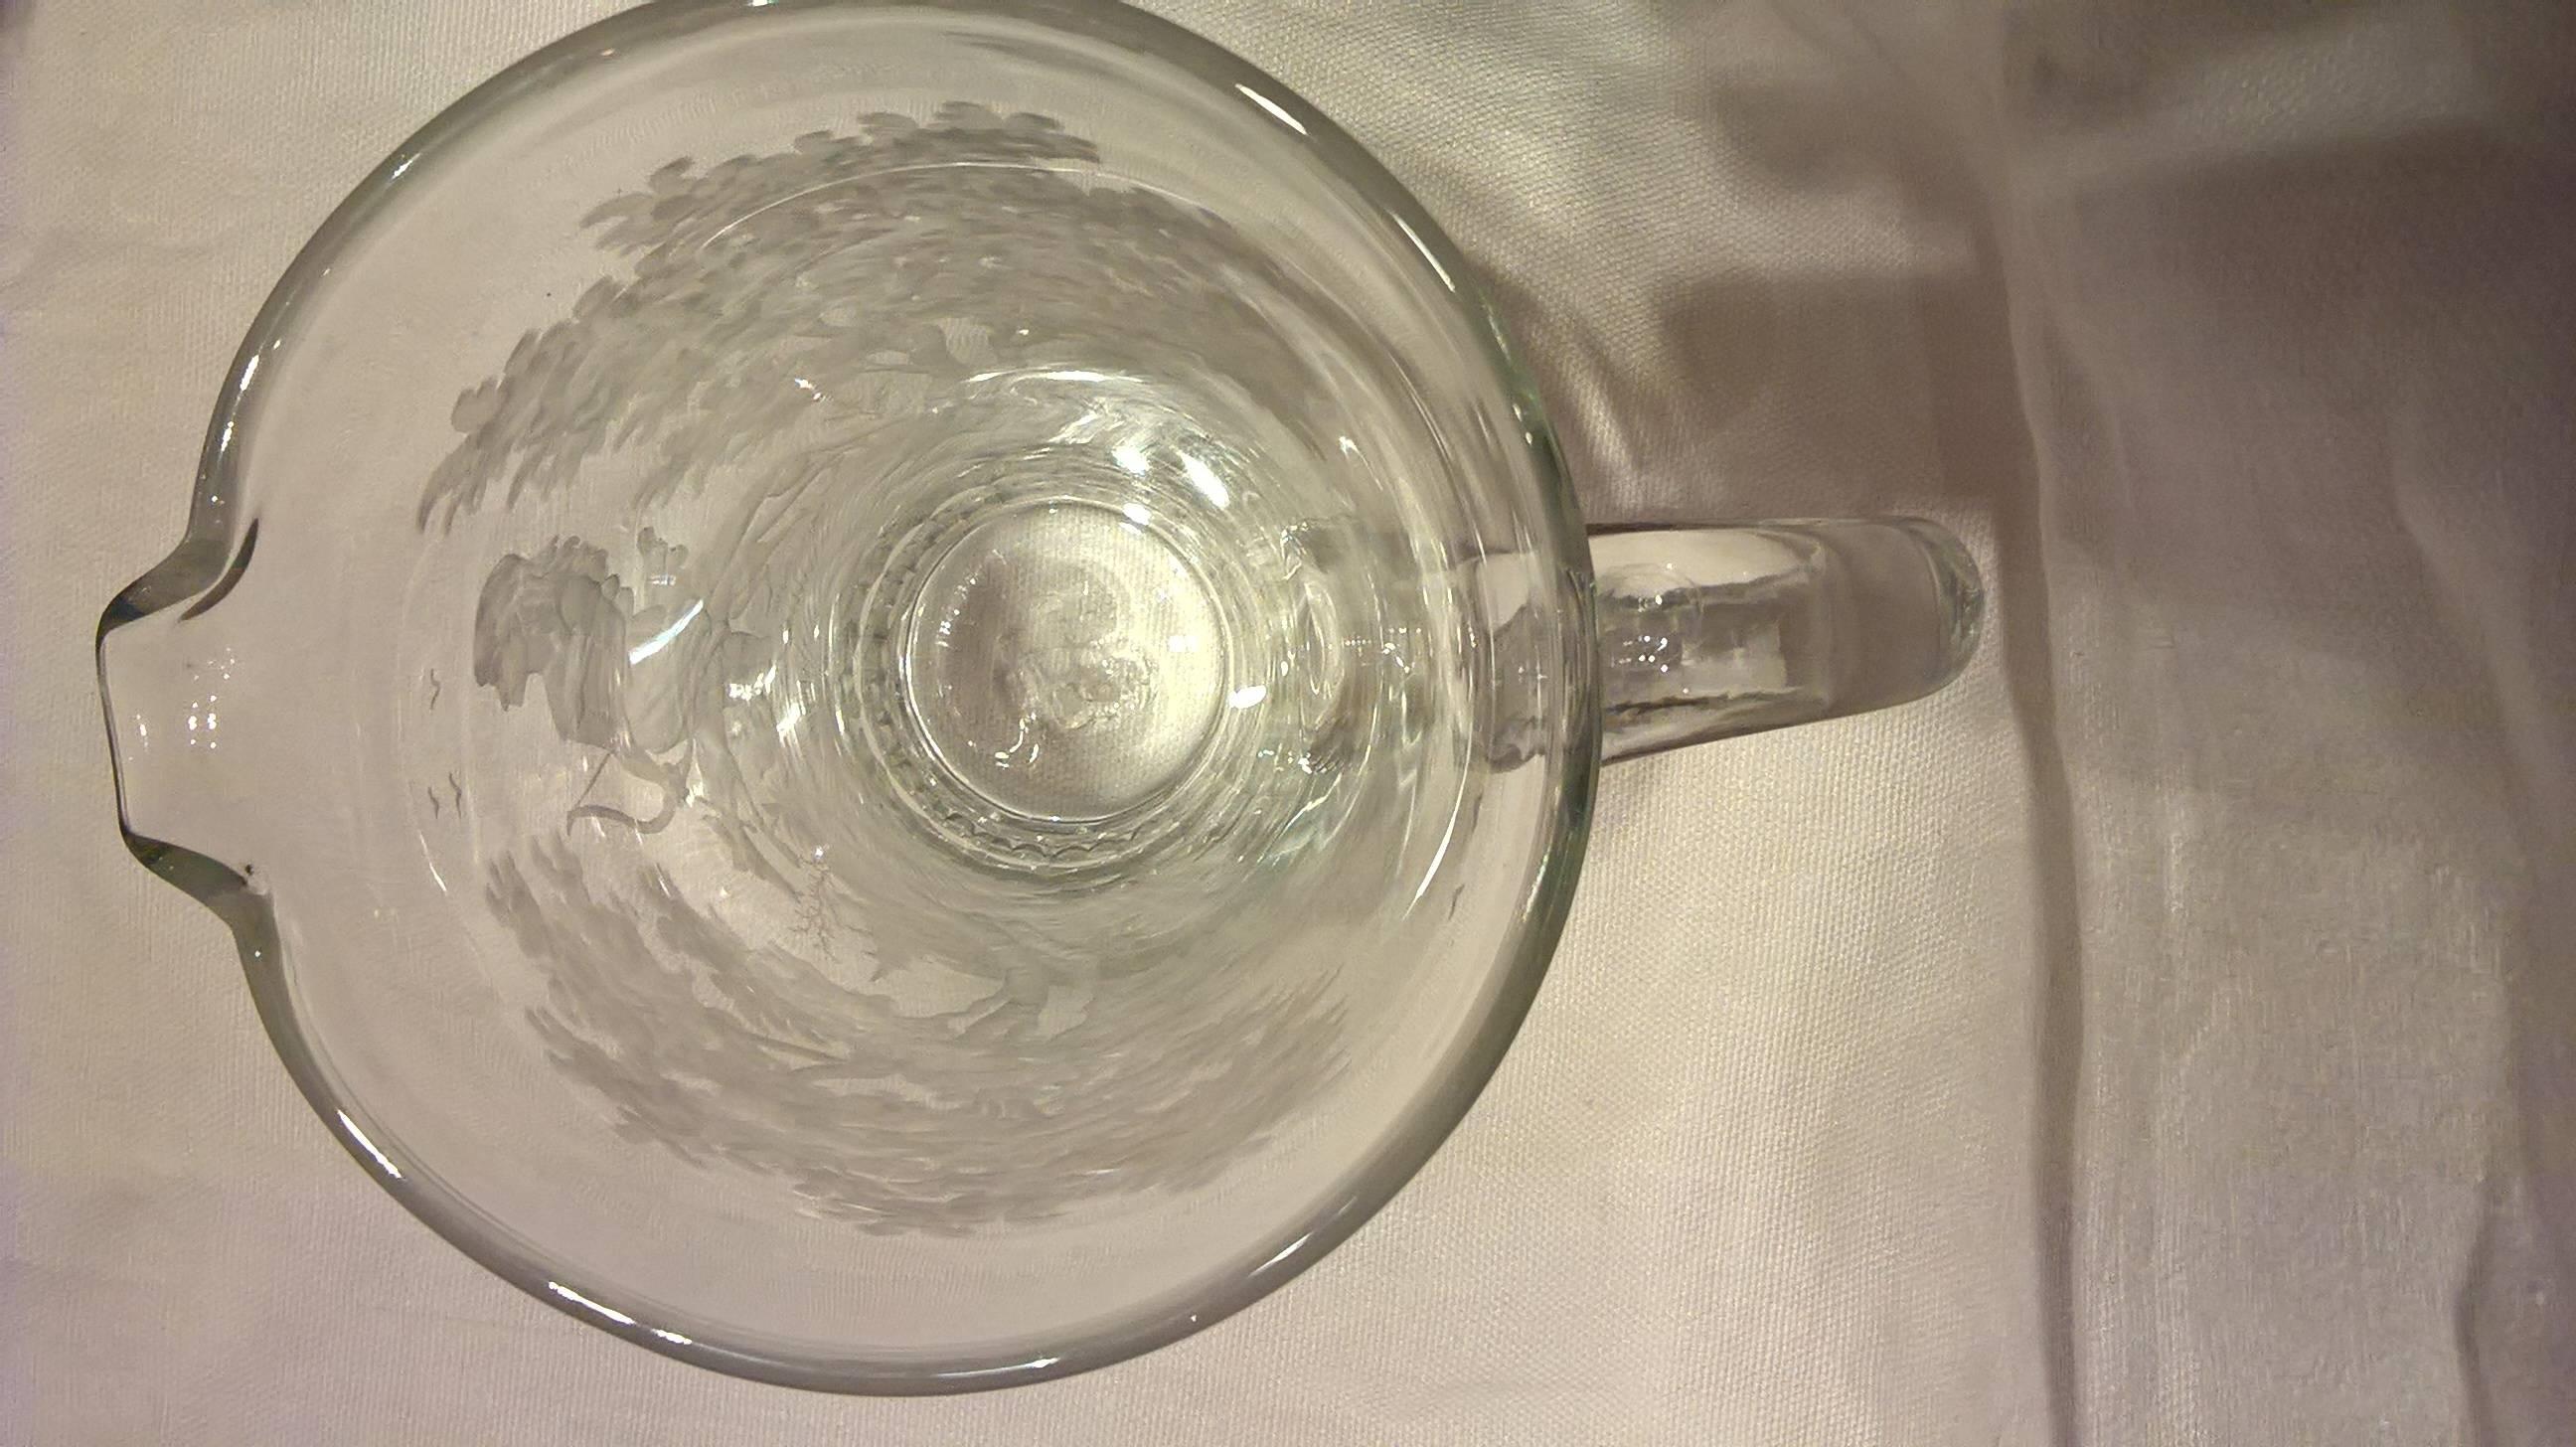 Czech Moser Art Deco Glass Pitcher Hand-Engraved with Diana and Wolfs in Clear Crystal